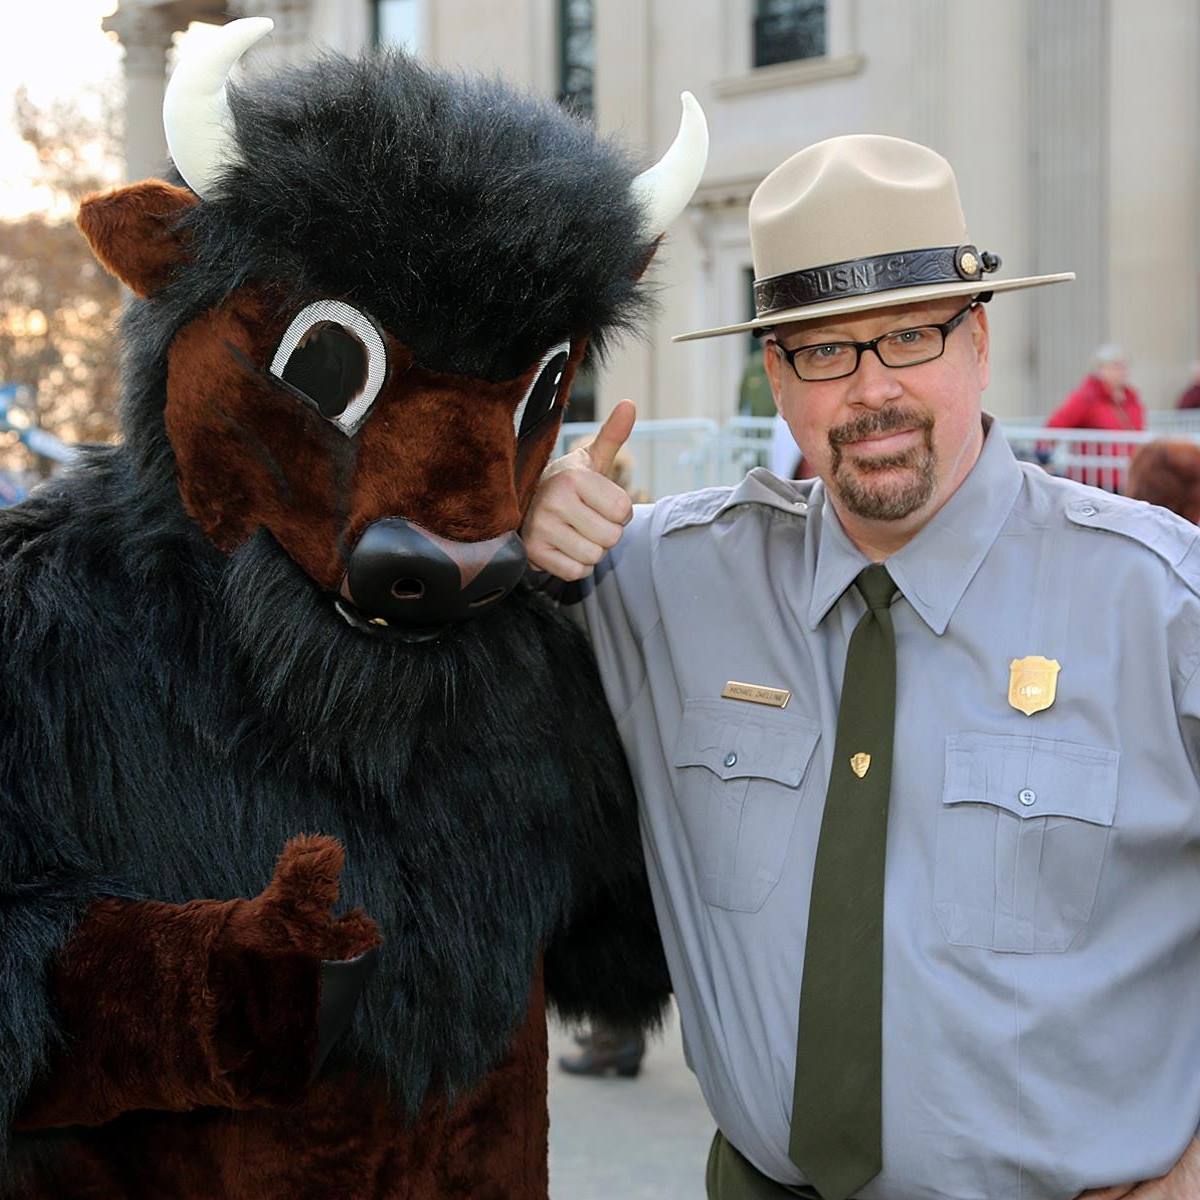 Park ranger standing beside a person in a bison costume